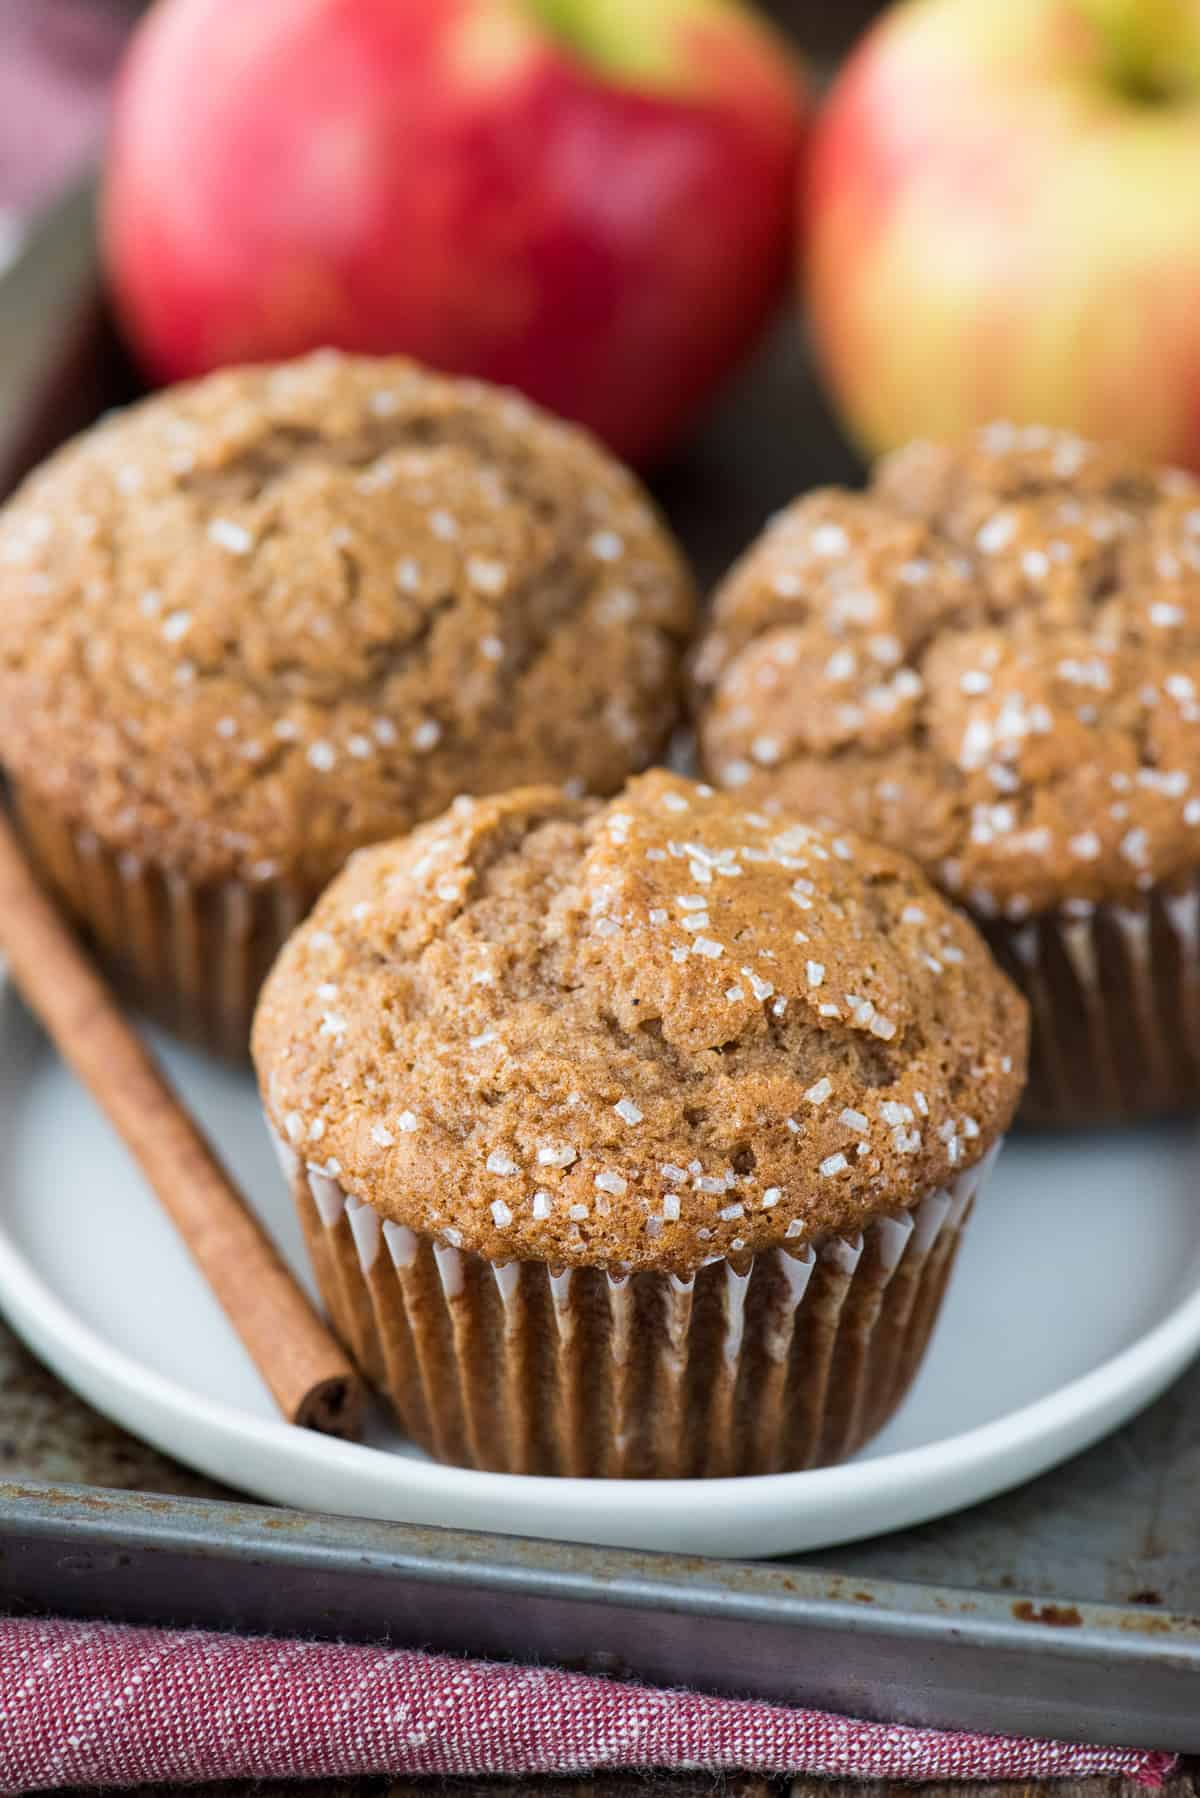 three apple muffins on white plate with cinnamon stick